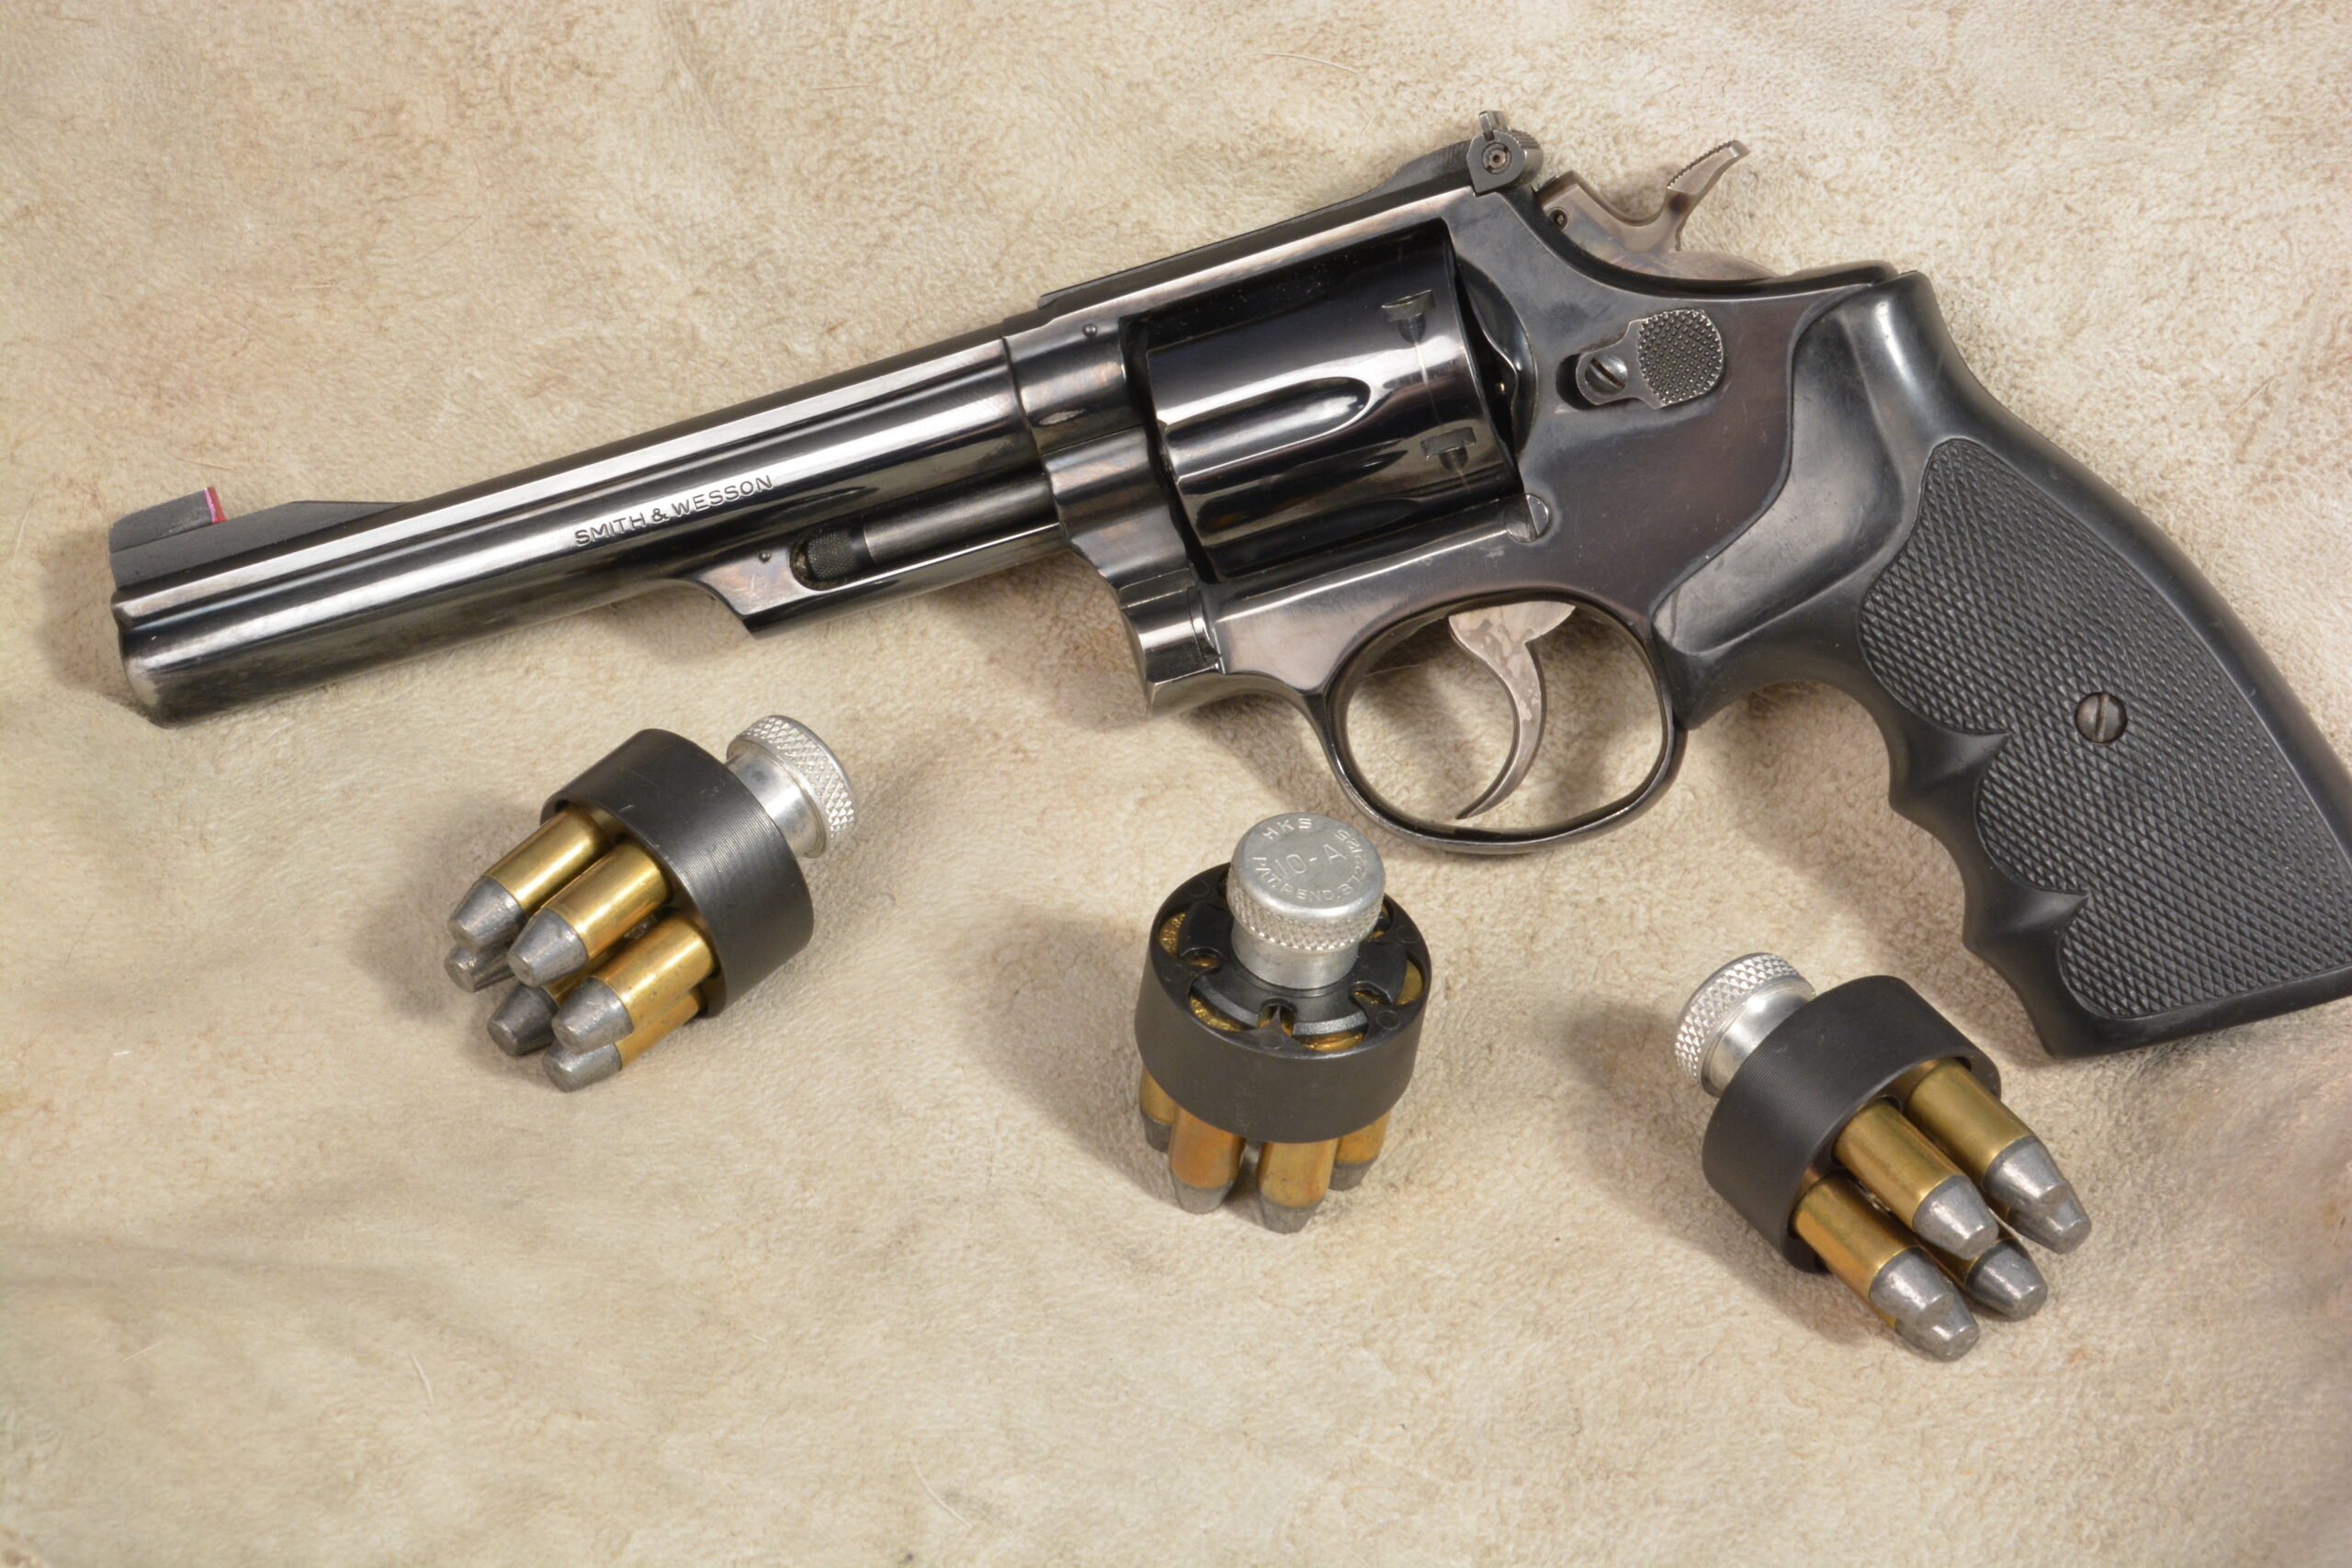 Model 19 is our pick for best revolver.